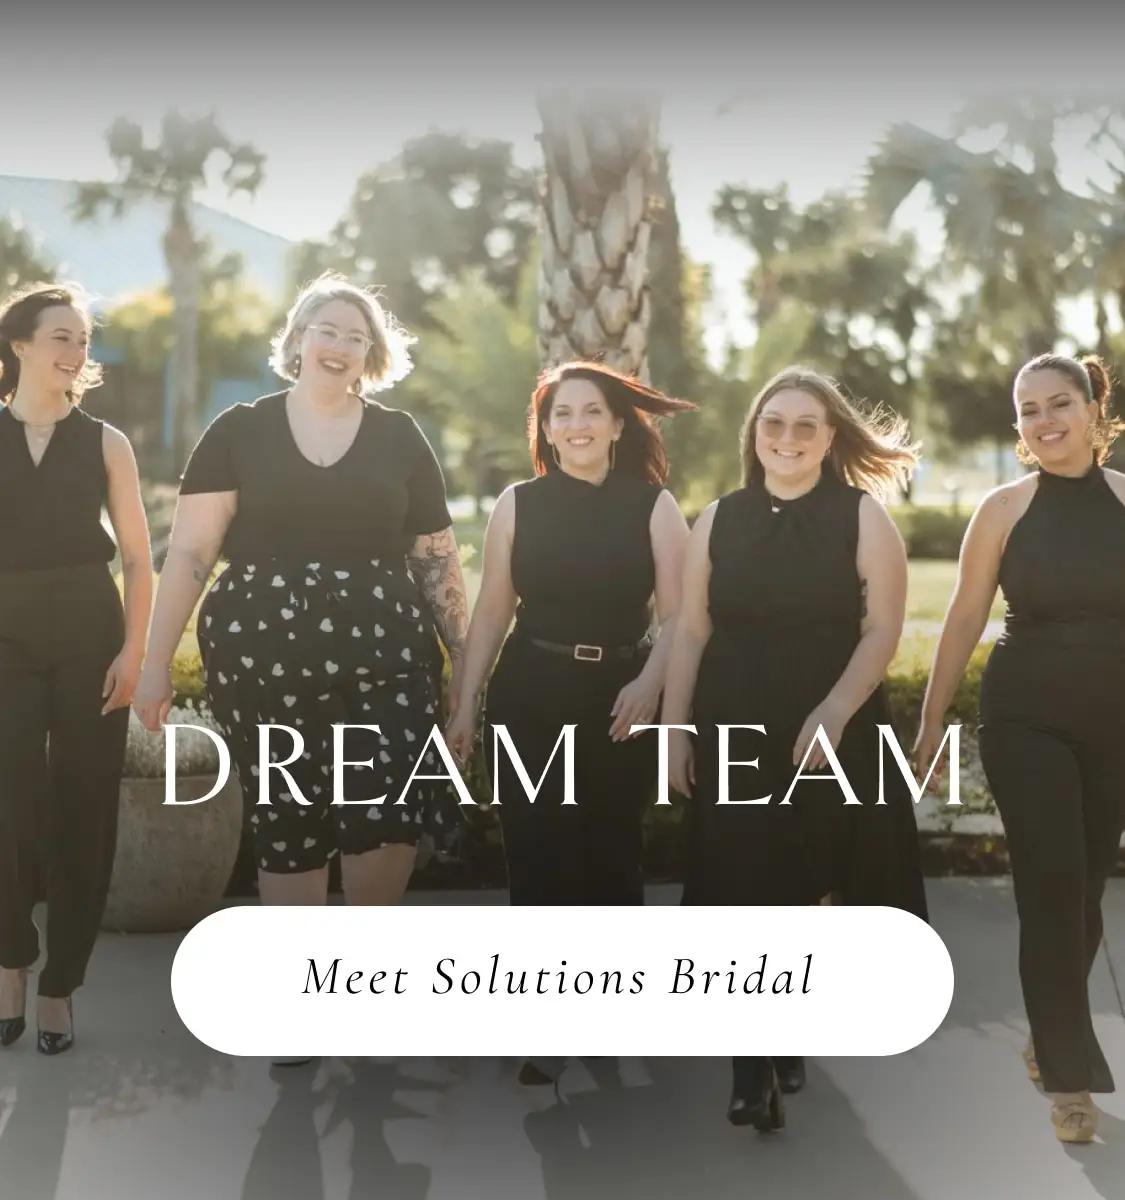 Meet the Team at Solutions Bridal